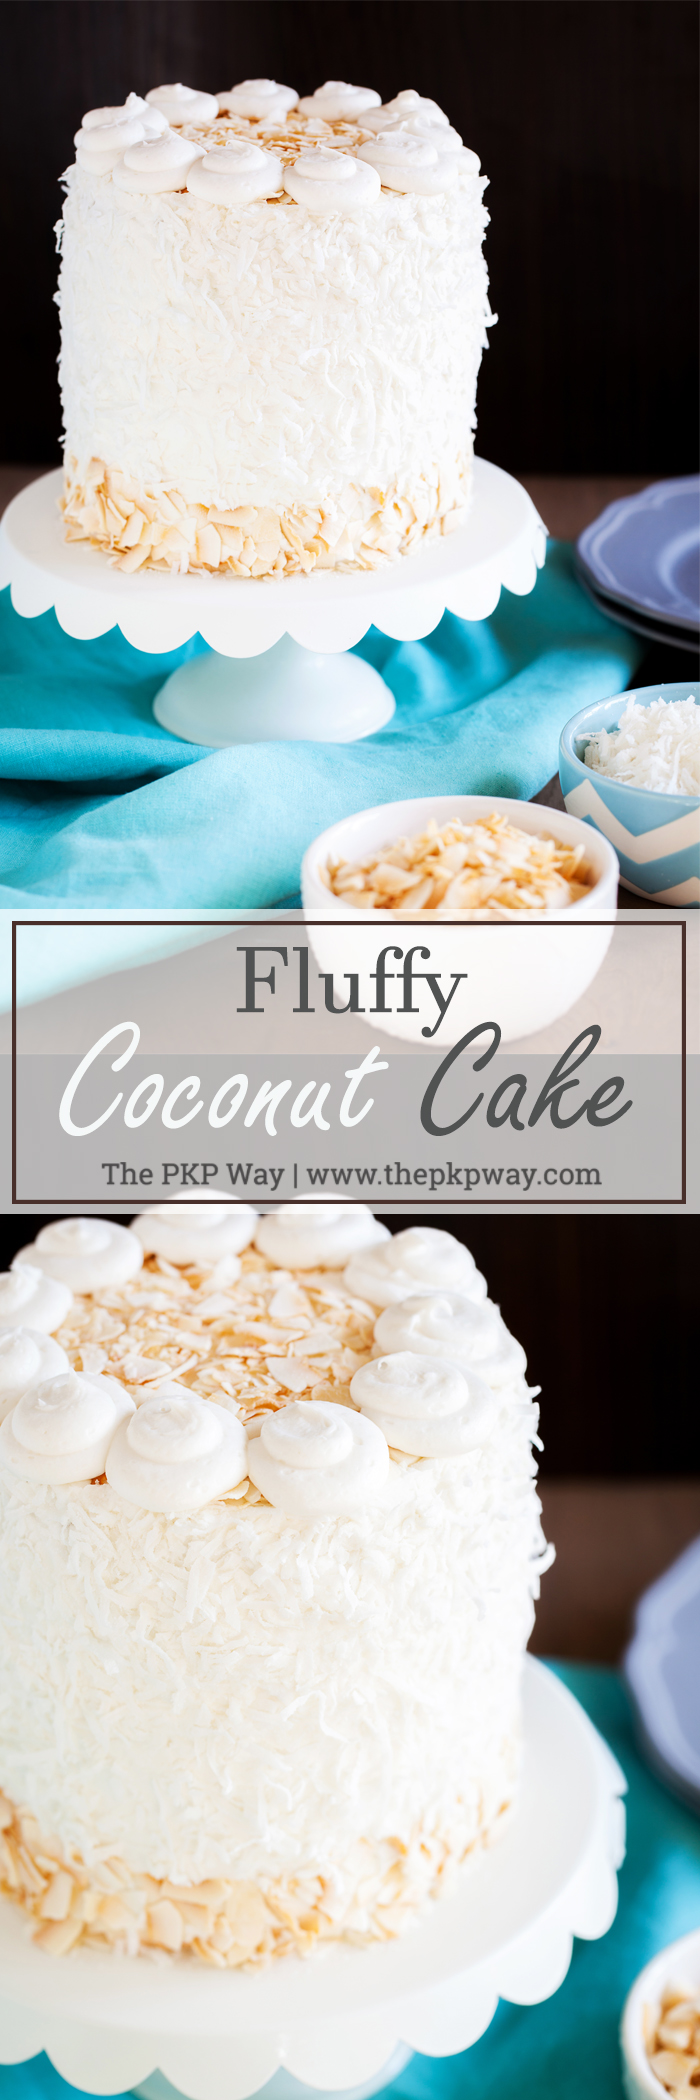 Fluffy Coconut Cake The Pkp Way,Granite Kitchen Islands With Seating